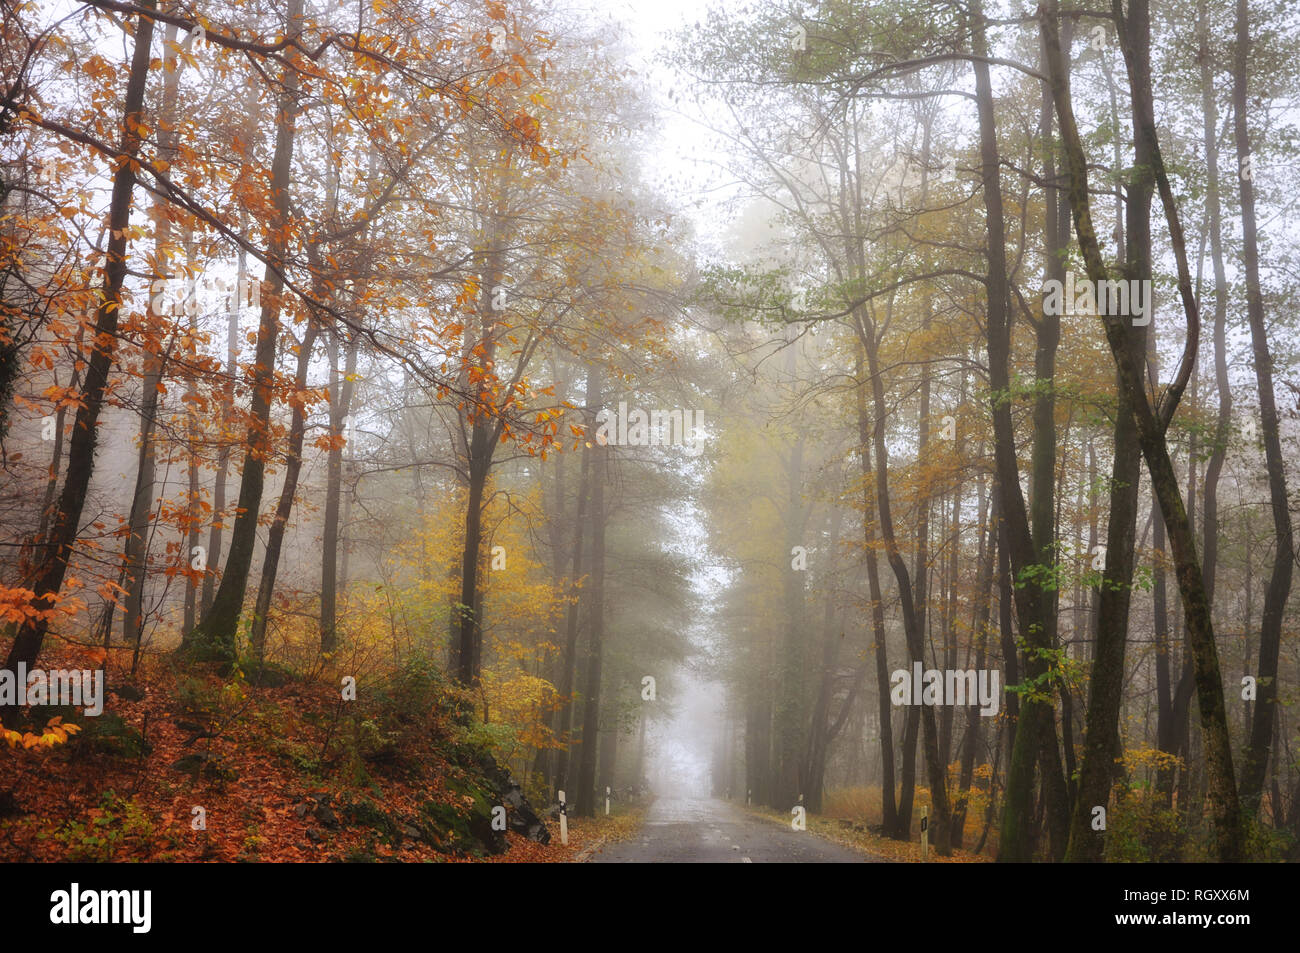 Foggy Road with Autumn Trees and Leaves in Ascona, Switzerland. Stock Photo